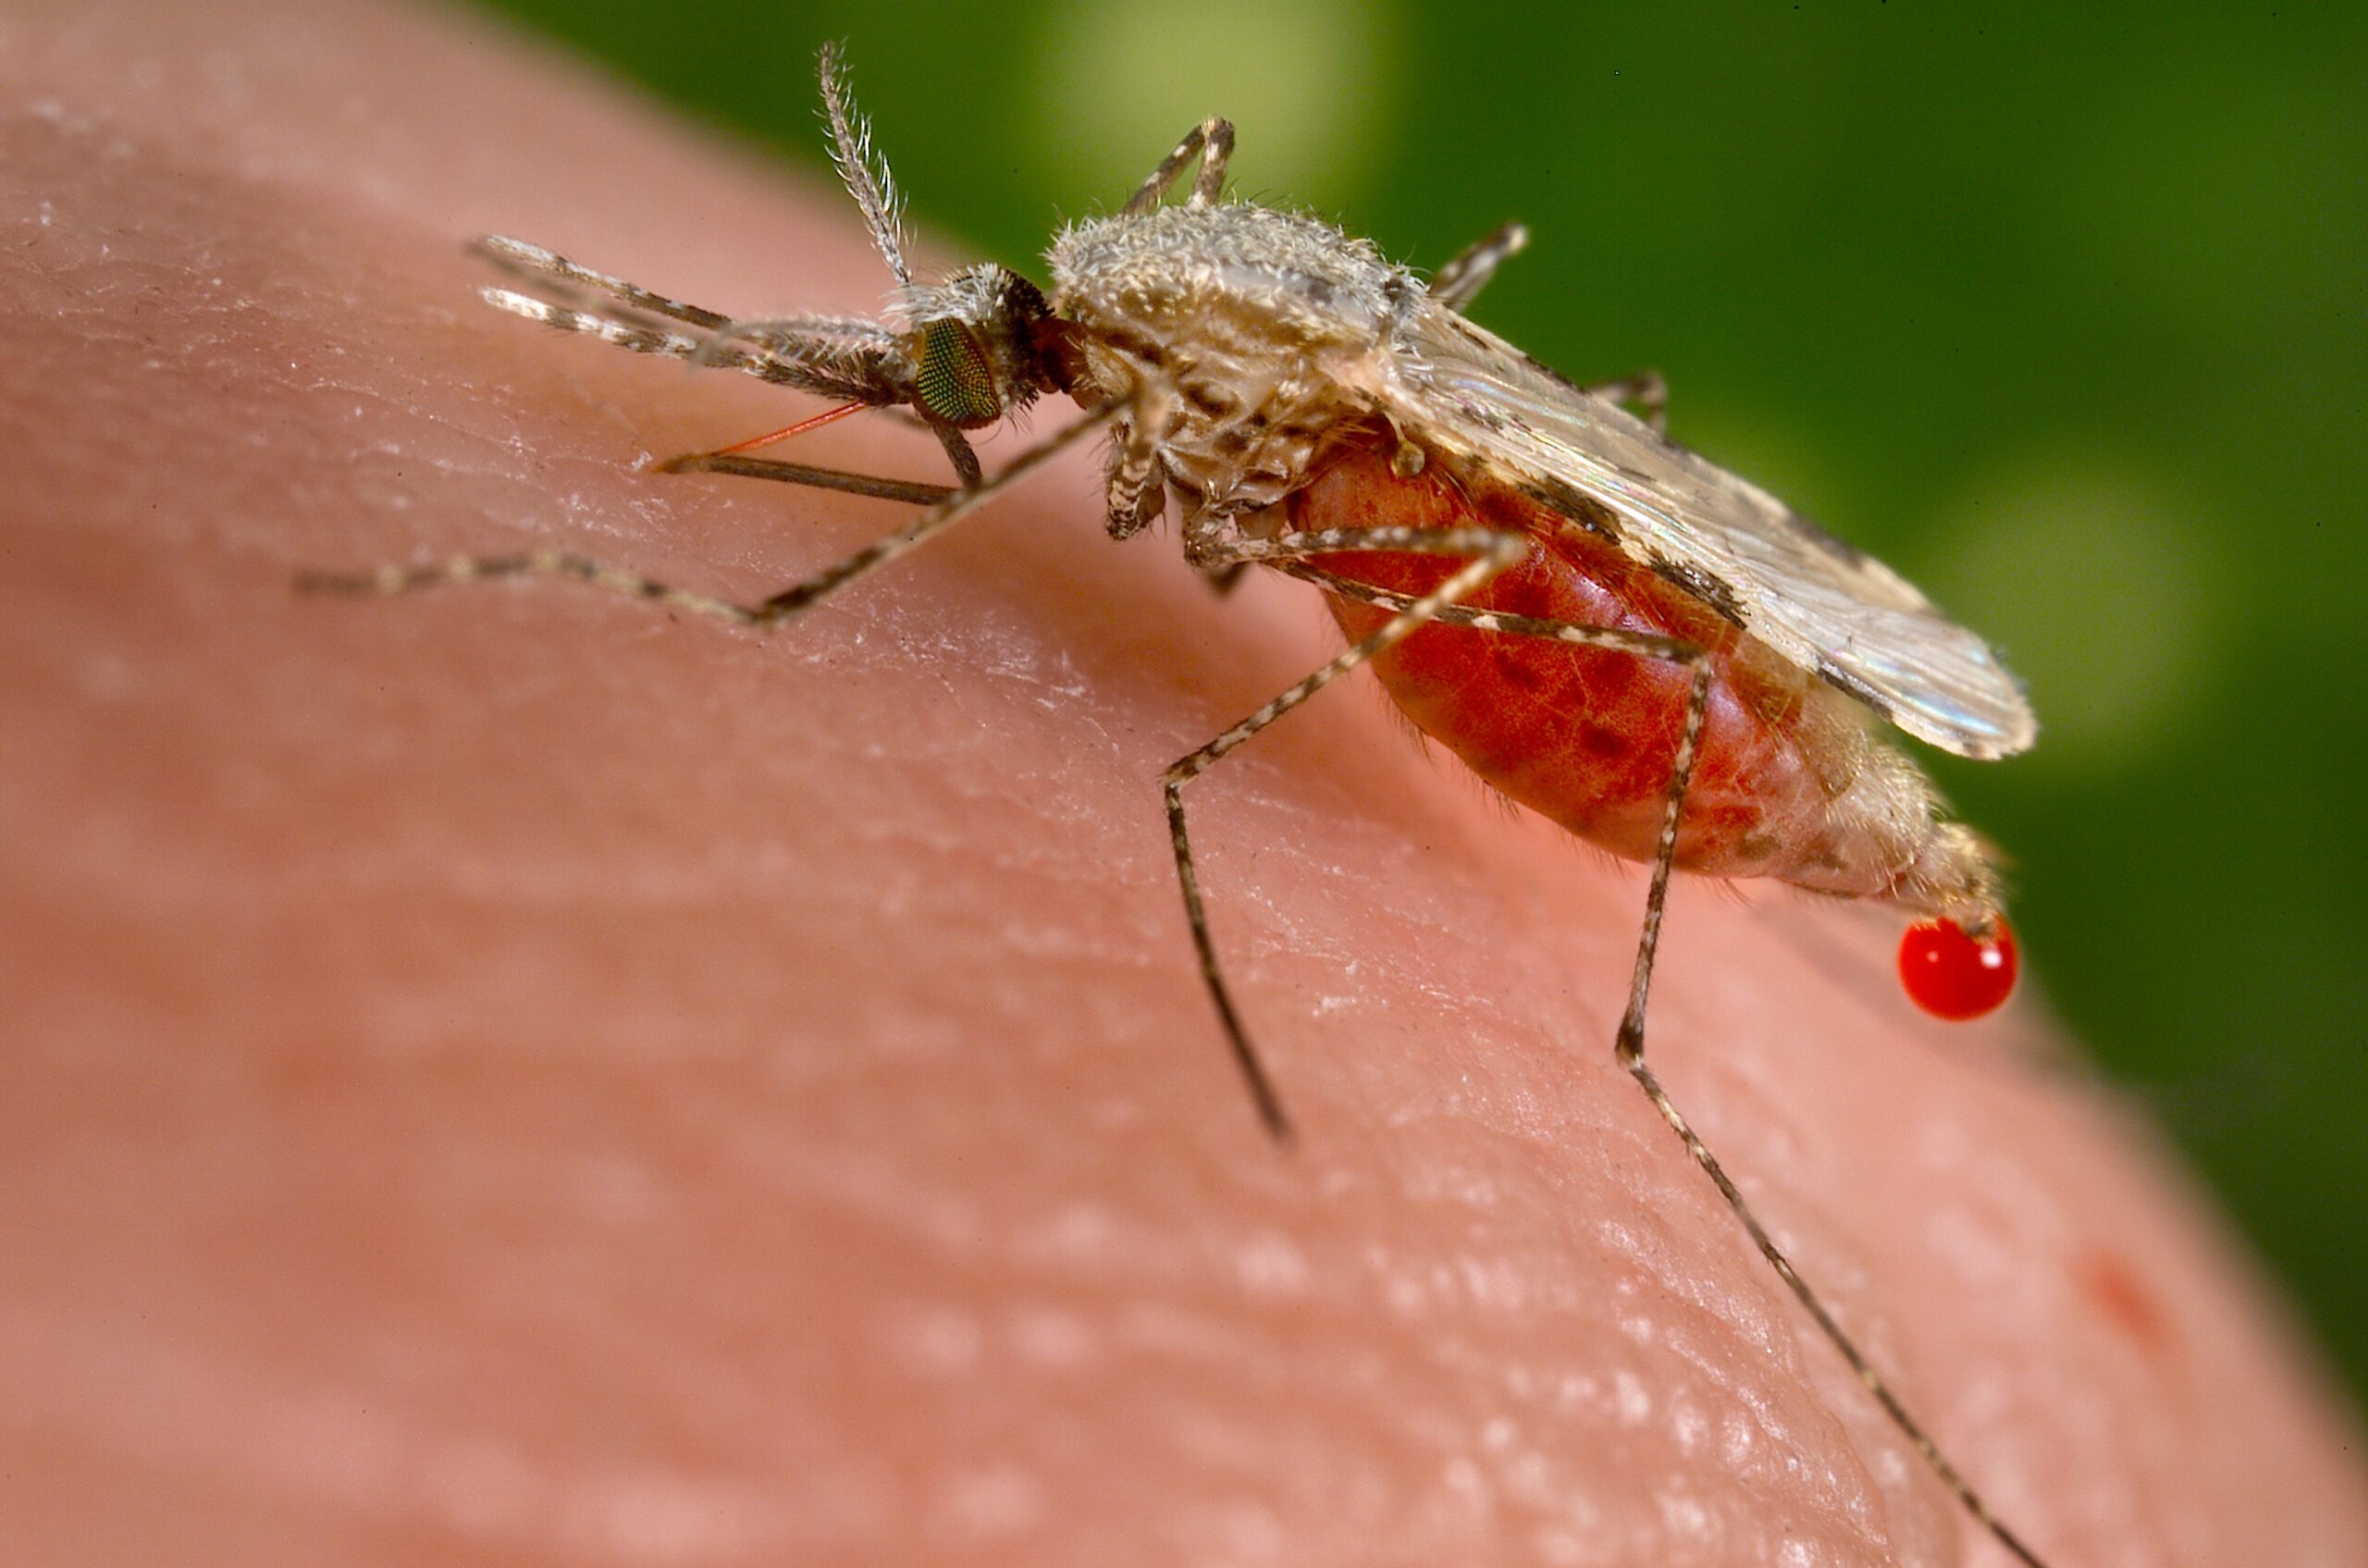 The Month In Plagues: Dengue Fever In Hawaii, Gene Drive Mosquitoes, And More